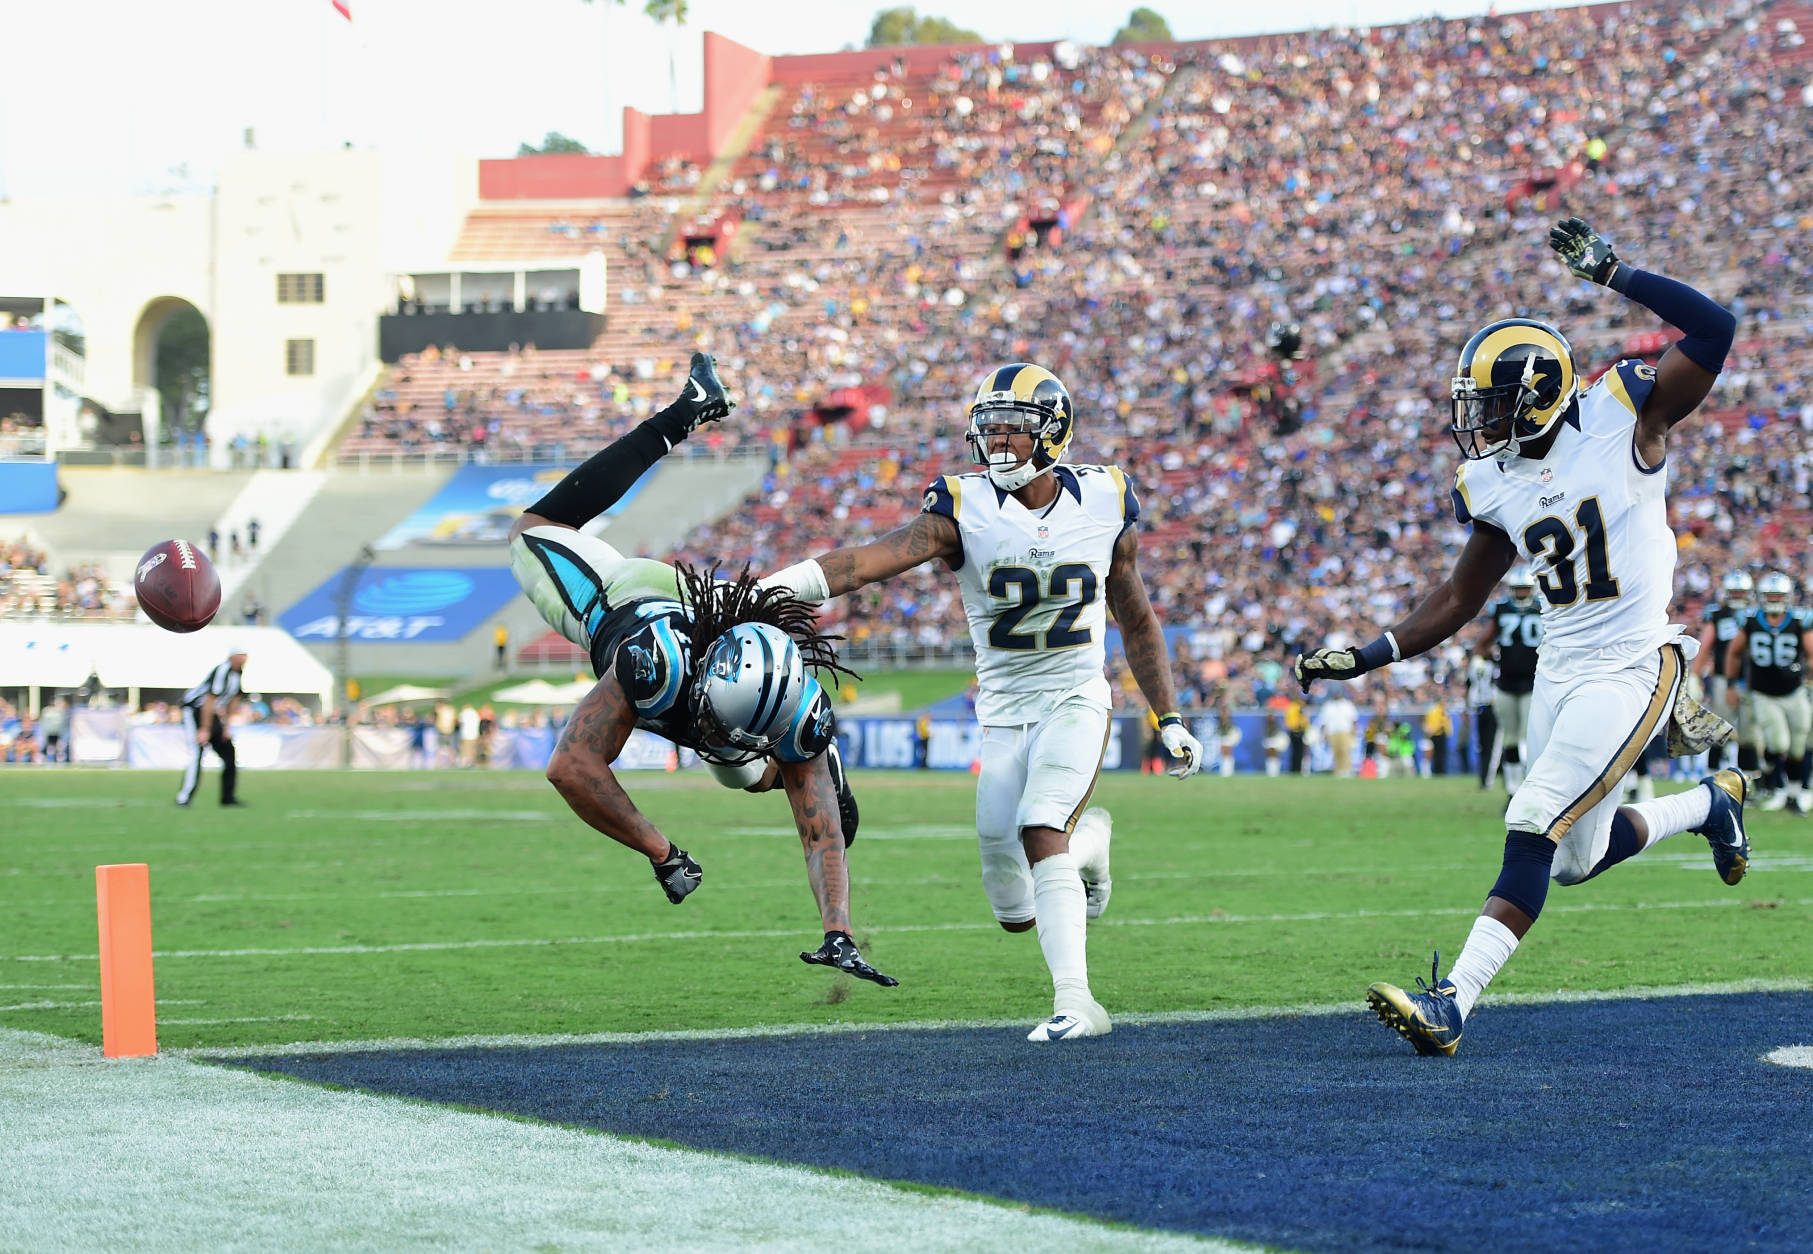 LOS ANGELES, CA - NOVEMBER 06:  Kelvin Benjamin #13 of the Carolina Panthers misses a catch in front of Trumaine Johnson #22 and Maurice Alexander #31 of the Los Angeles Rams during the fourth quarter of the game at the Los Angeles Coliseum on November 6, 2016 in Los Angeles, California.  (Photo by Harry How/Getty Images)